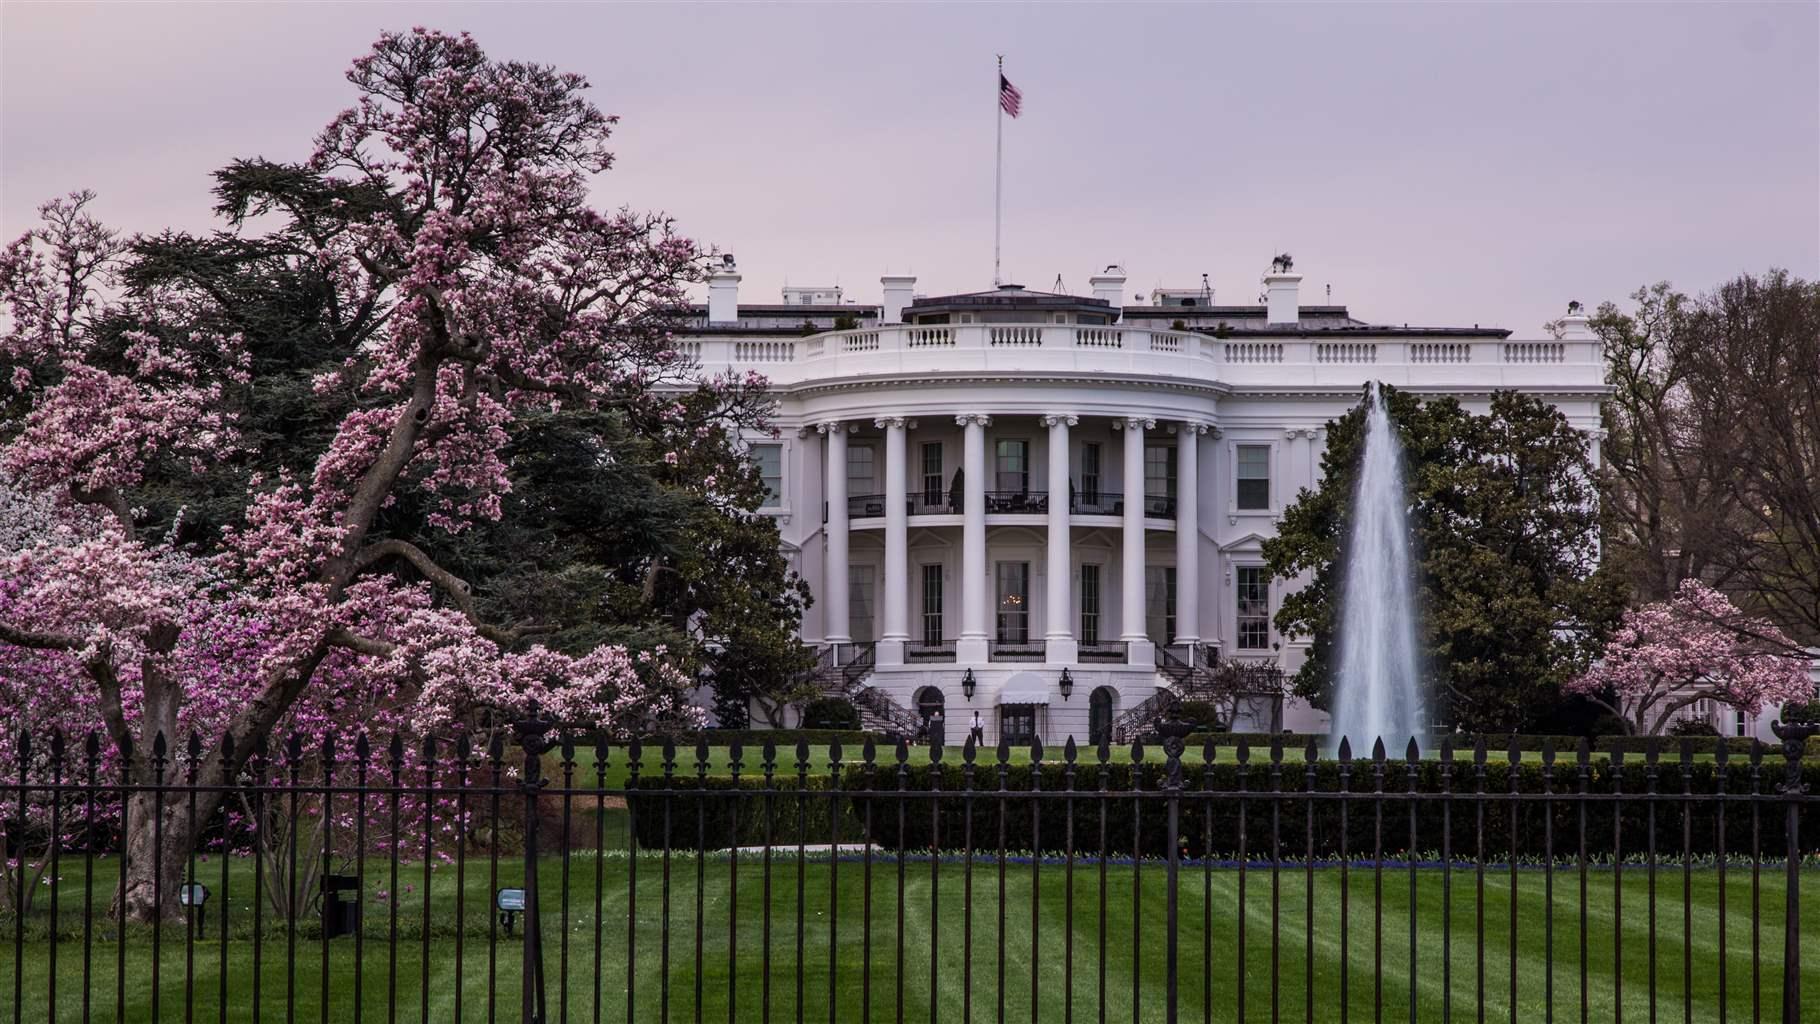 The White House front lawn in Washington DC with cherry blossoms in full bloom during sunset.